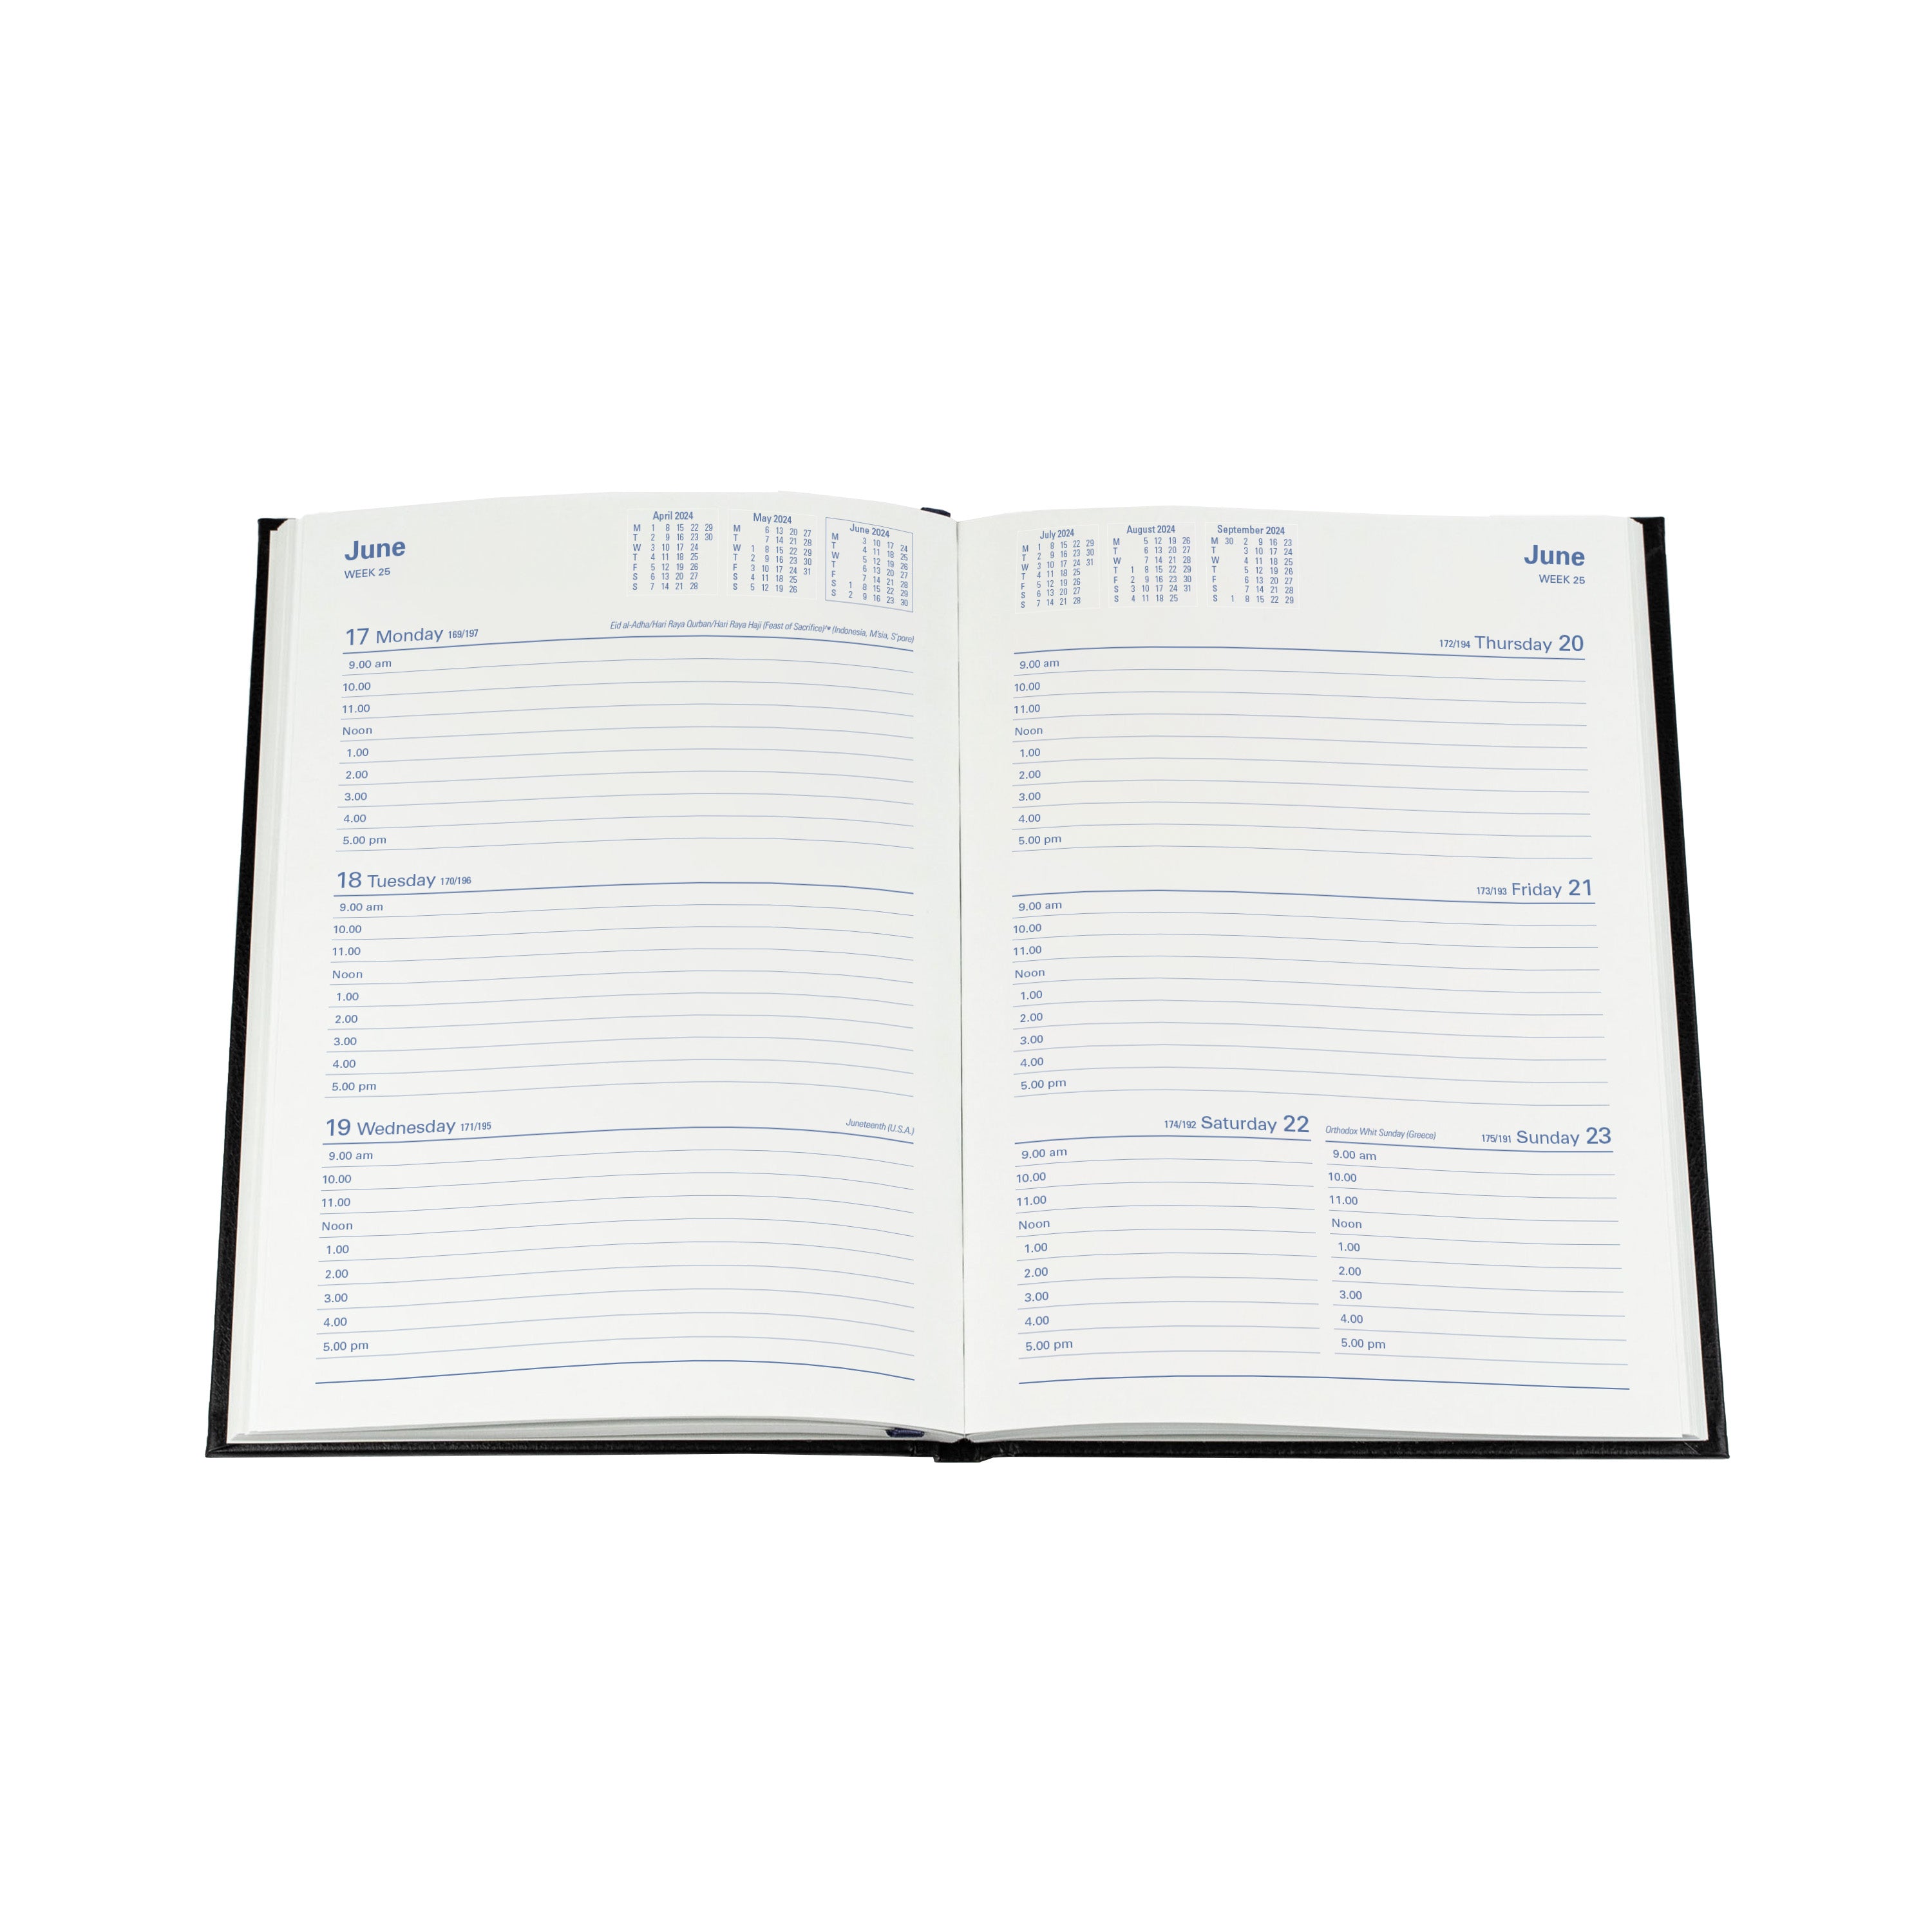 Sterling 2024 Diary - Week to View, Size A5 Black / A5 (210 x 148mm)